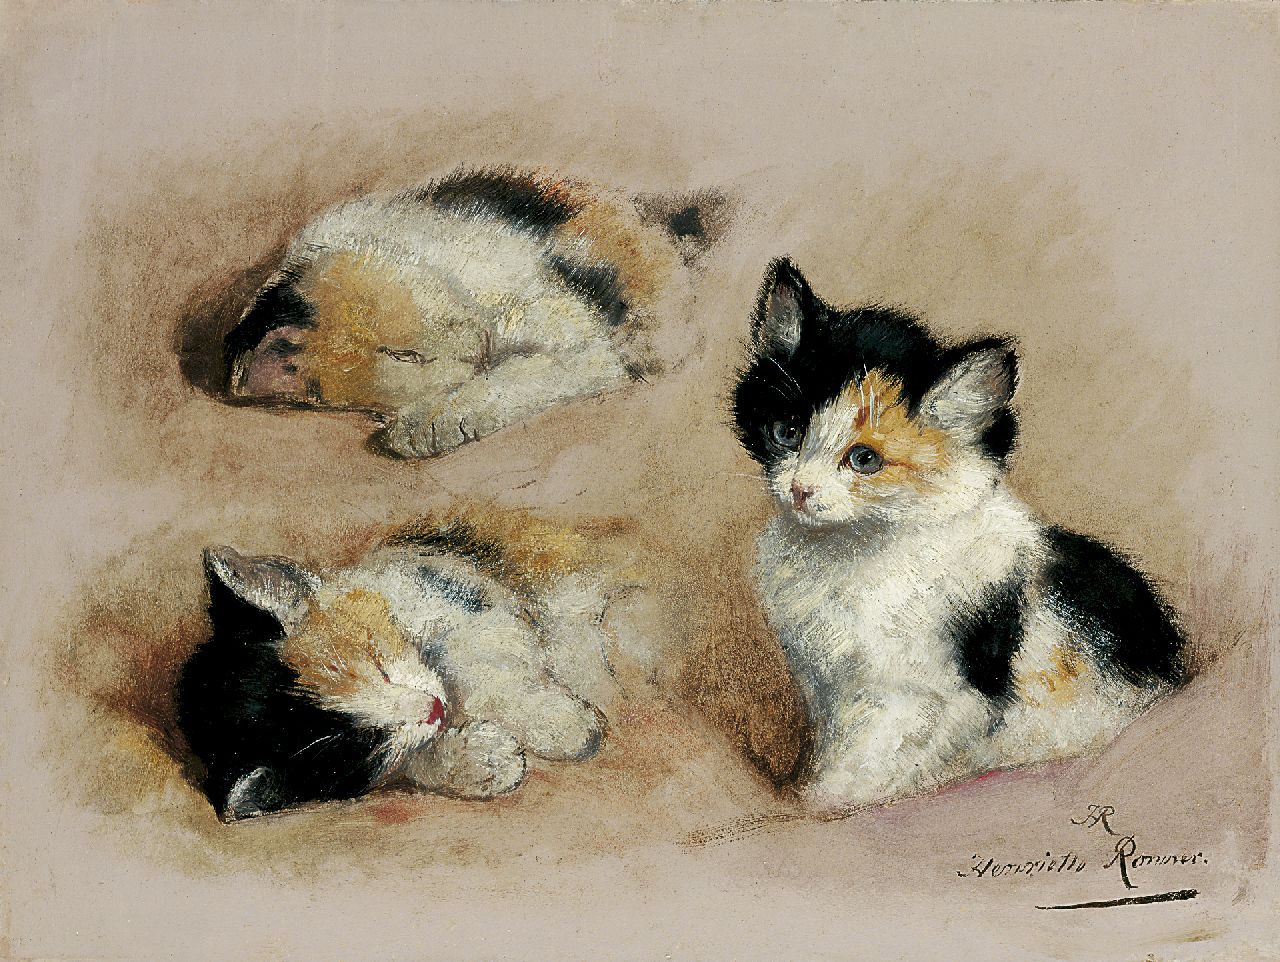 Ronner-Knip H.  | Henriette Ronner-Knip, Study of a kitten, Öl auf Papier auf Holz 27,1 x 36,1 cm, signed l.r. with initials and in full